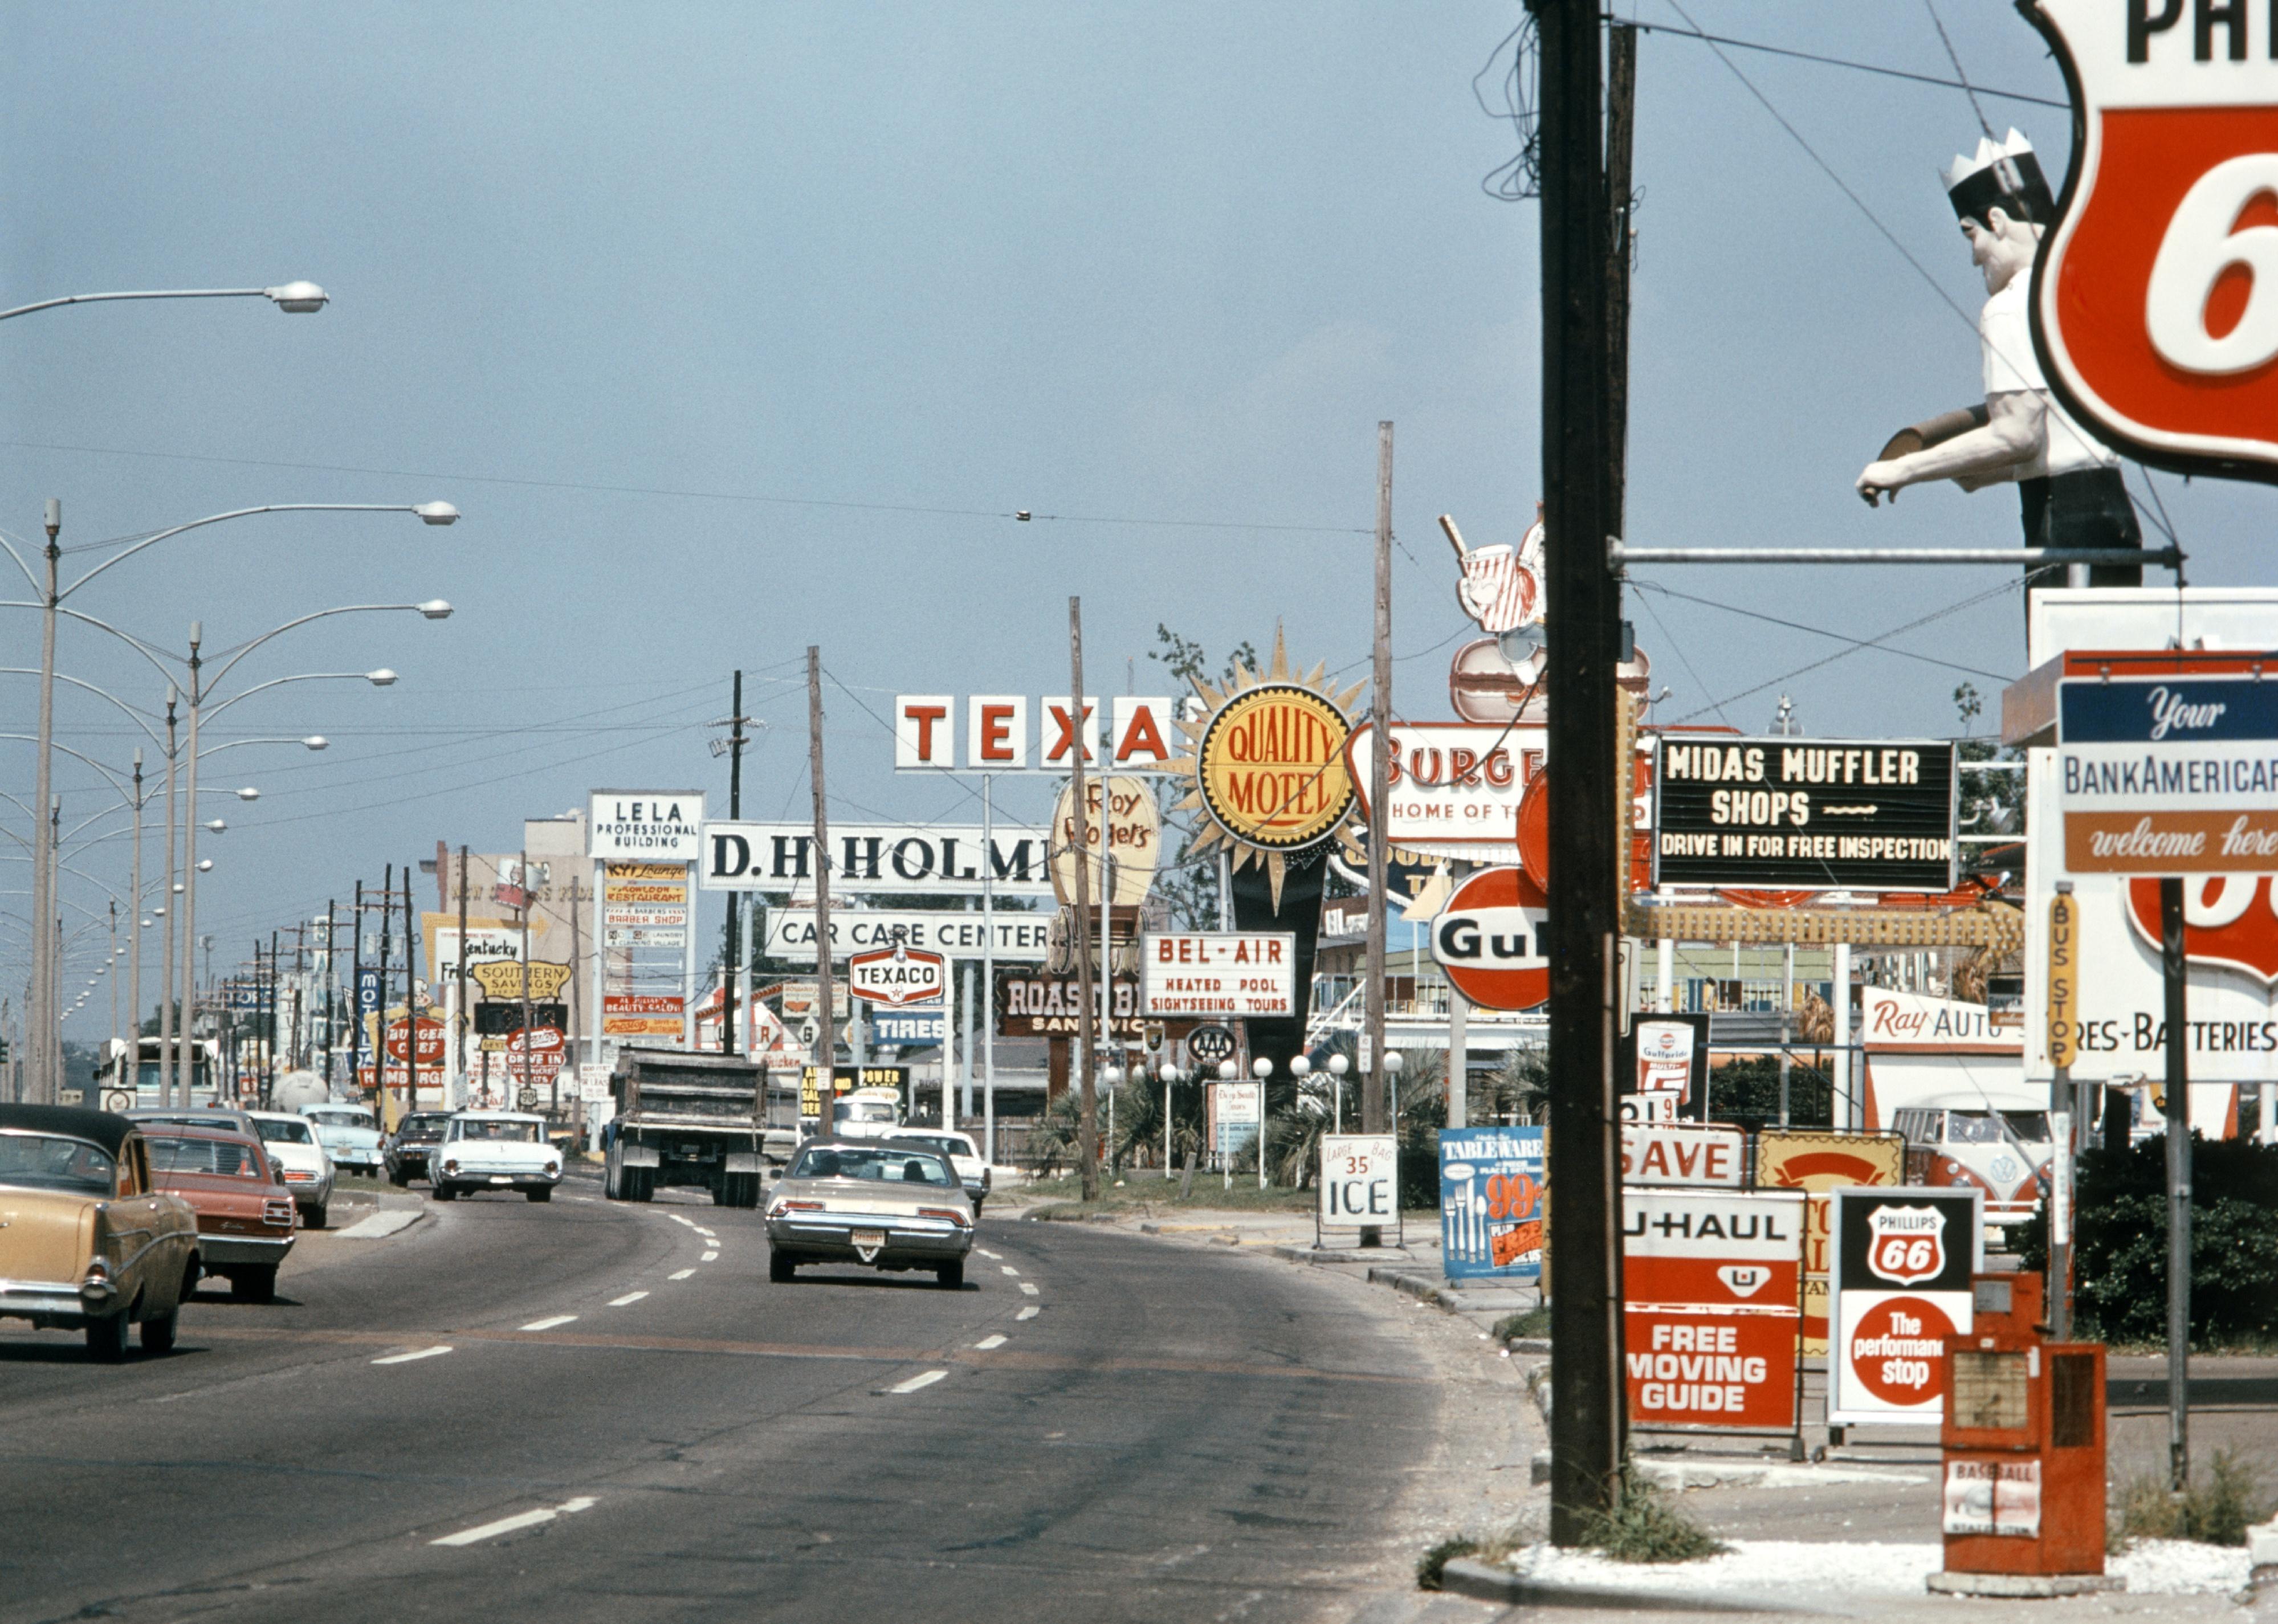 1970s street packed with store signs and cars.